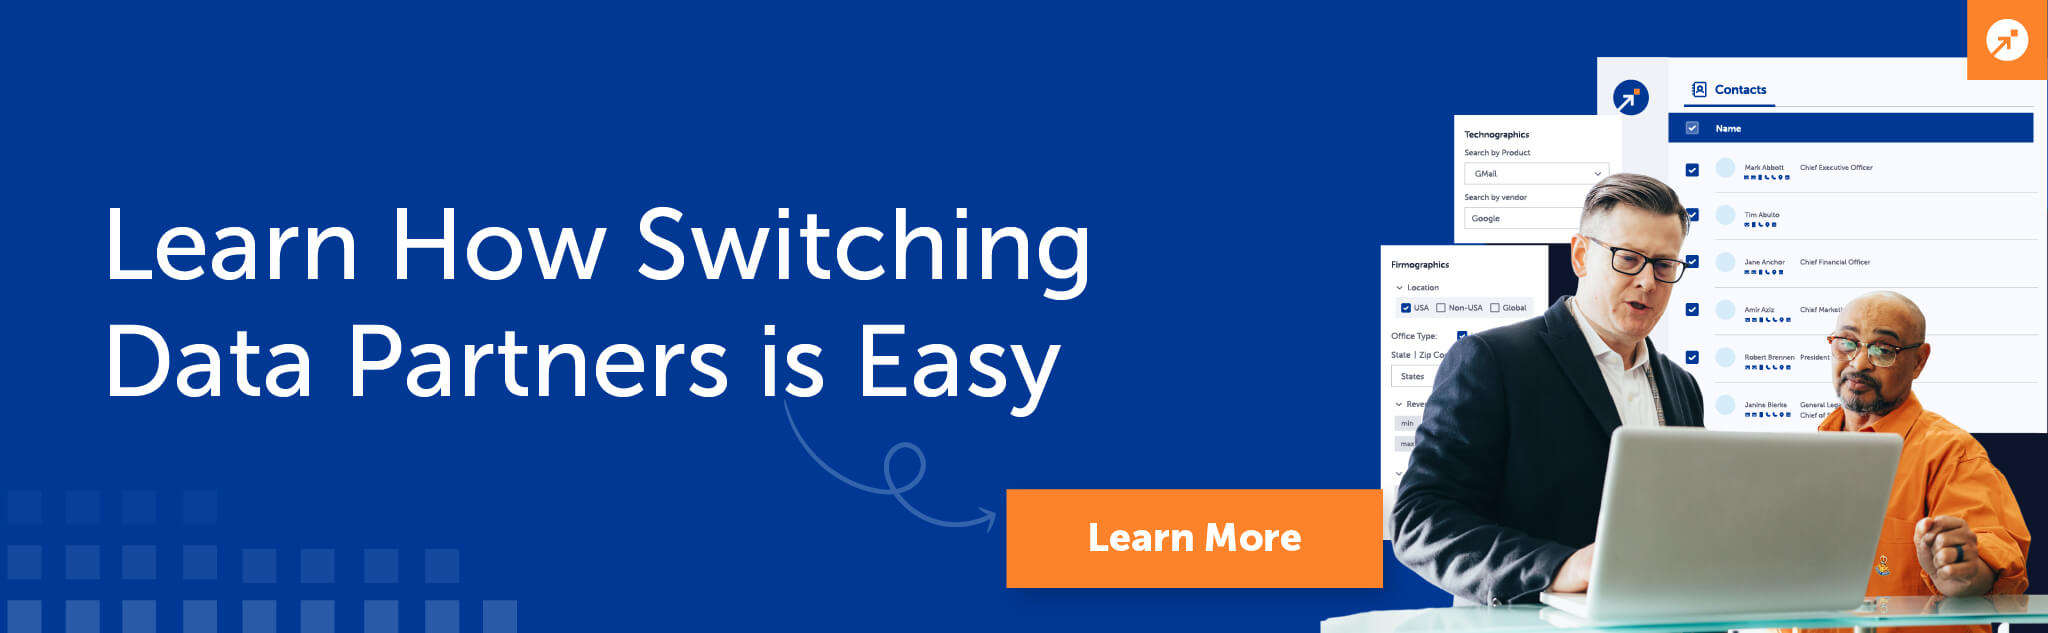 learn how switching data partners is easy